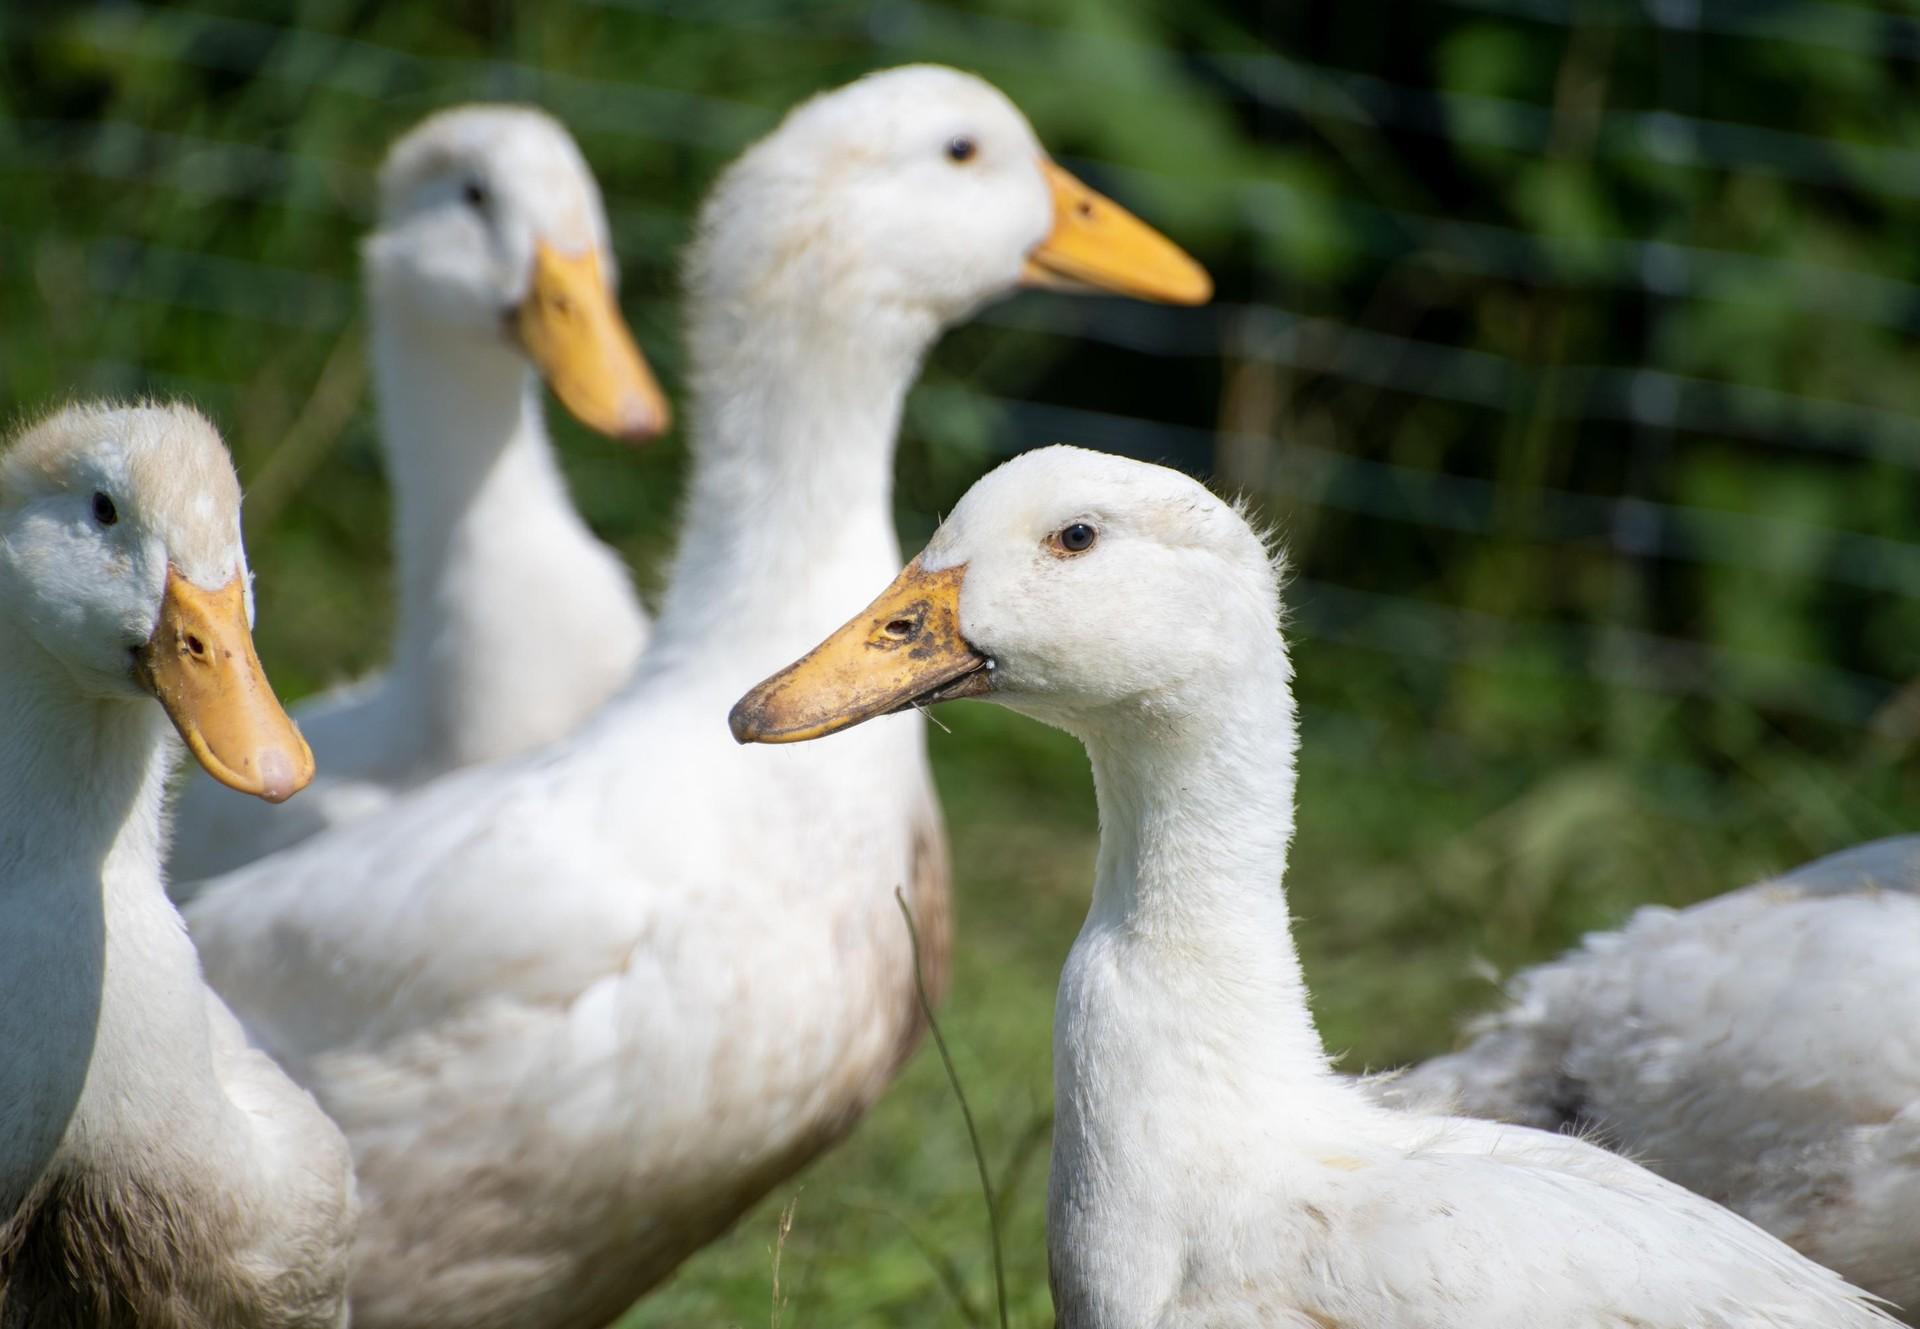 10 Facts About Ducks - Farm Animals - Topics - Campaigns & Topics - FOUR PAWS International